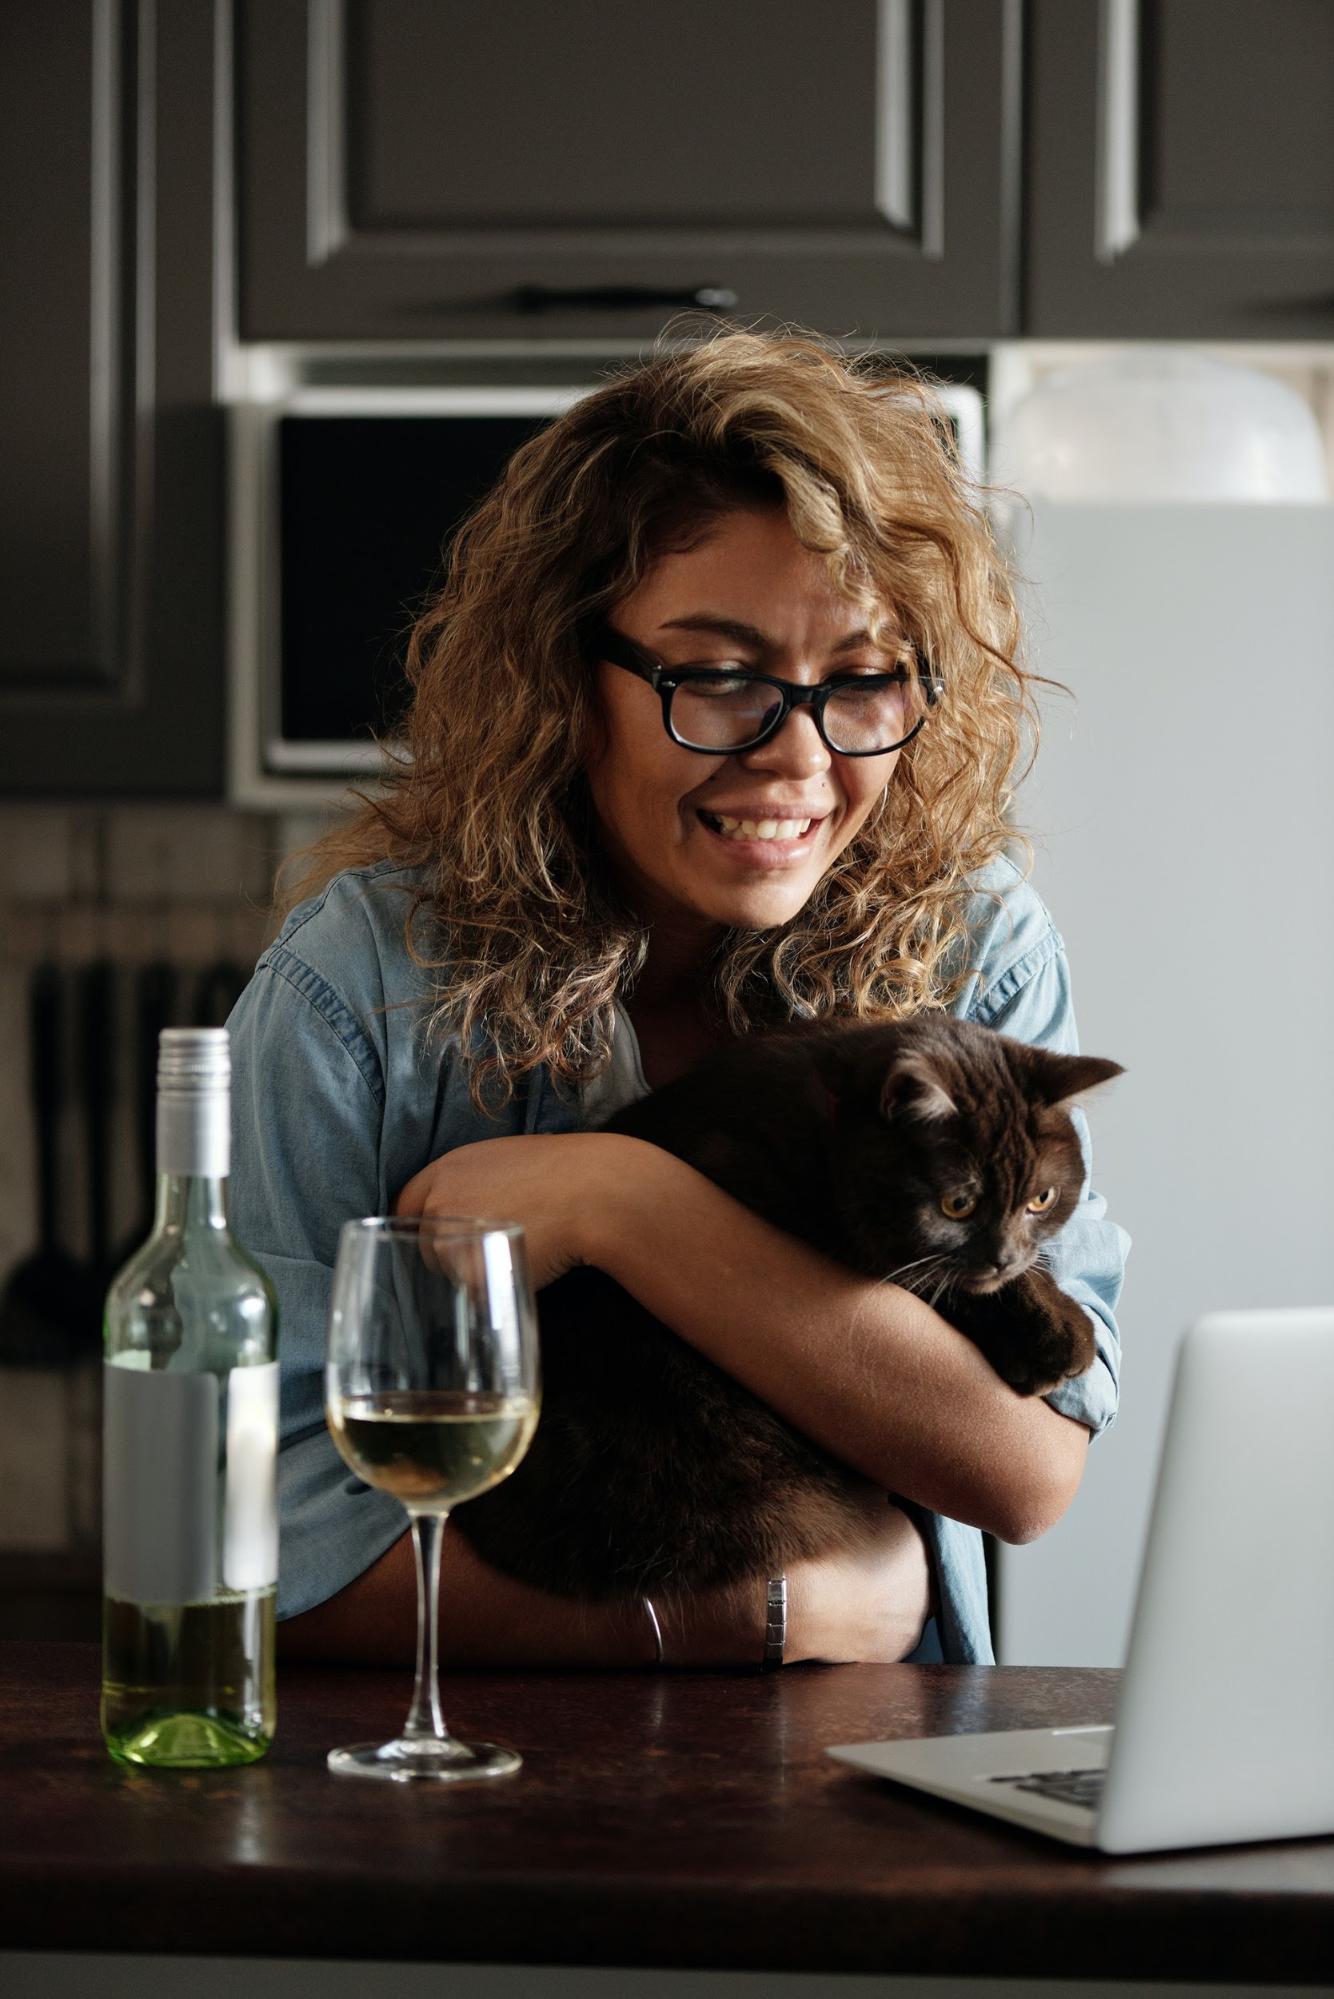 Lady with cat and wine